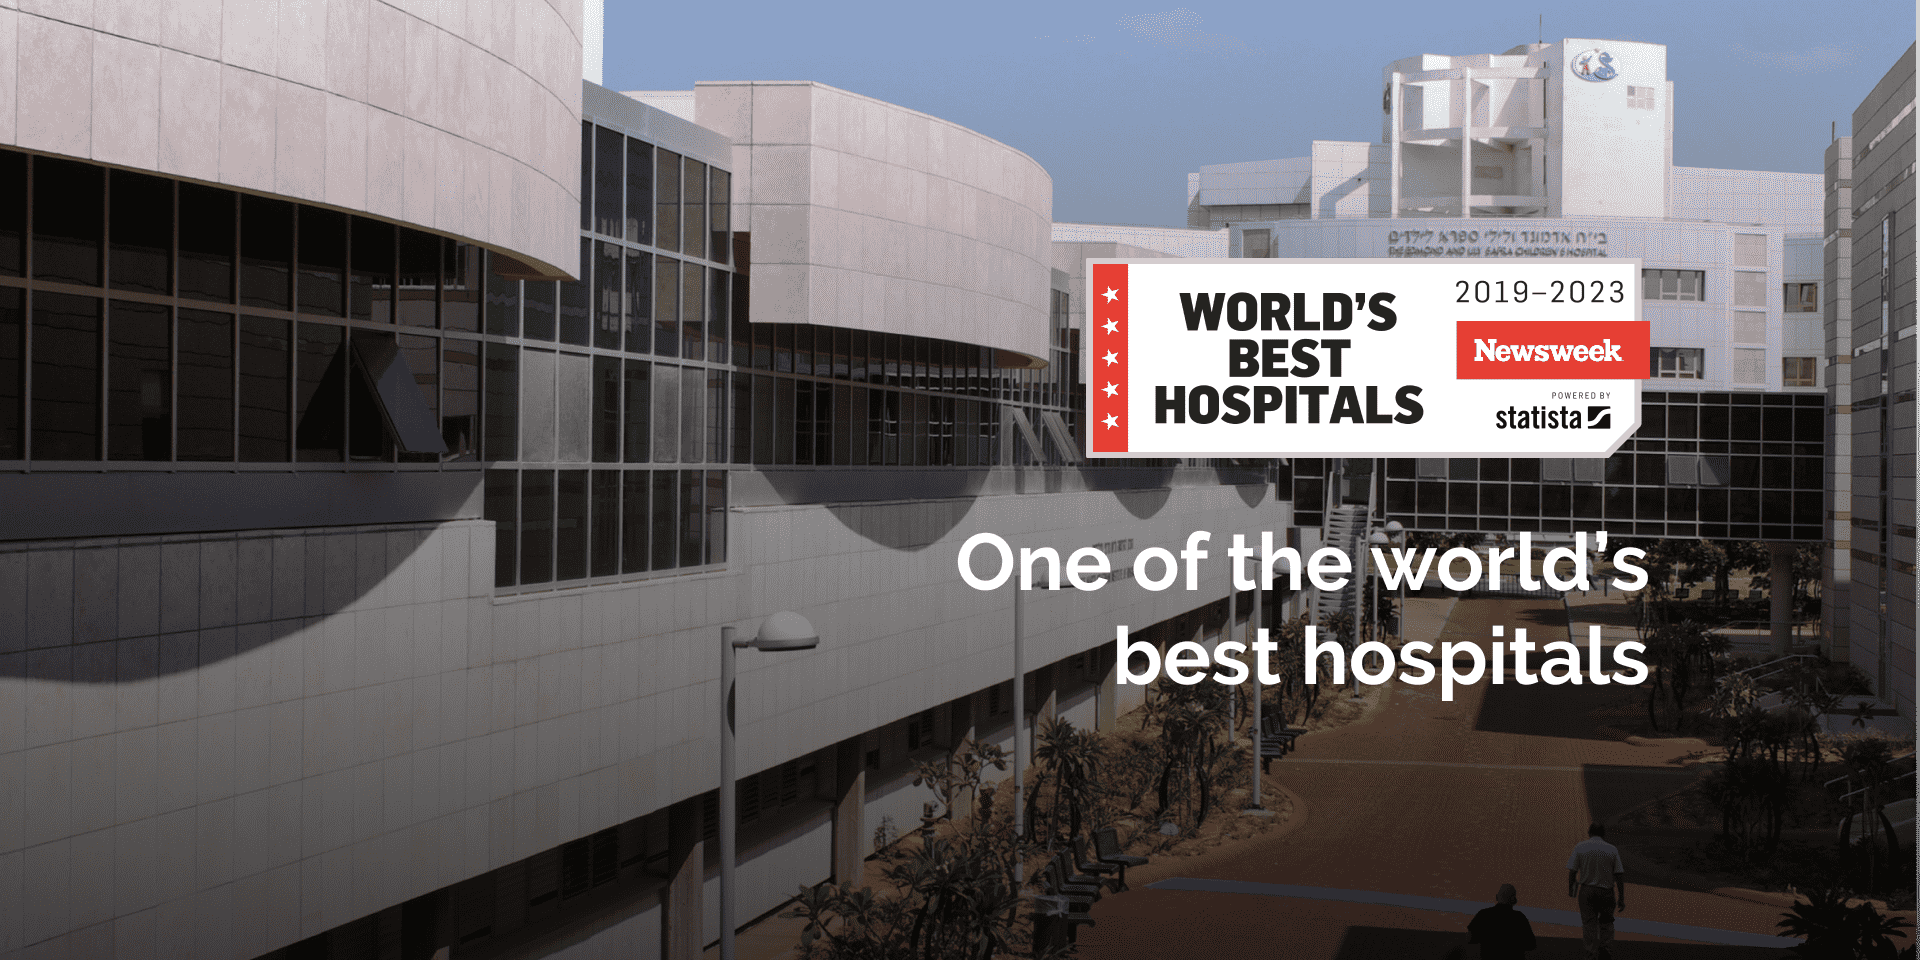 One of the world's best hospitals